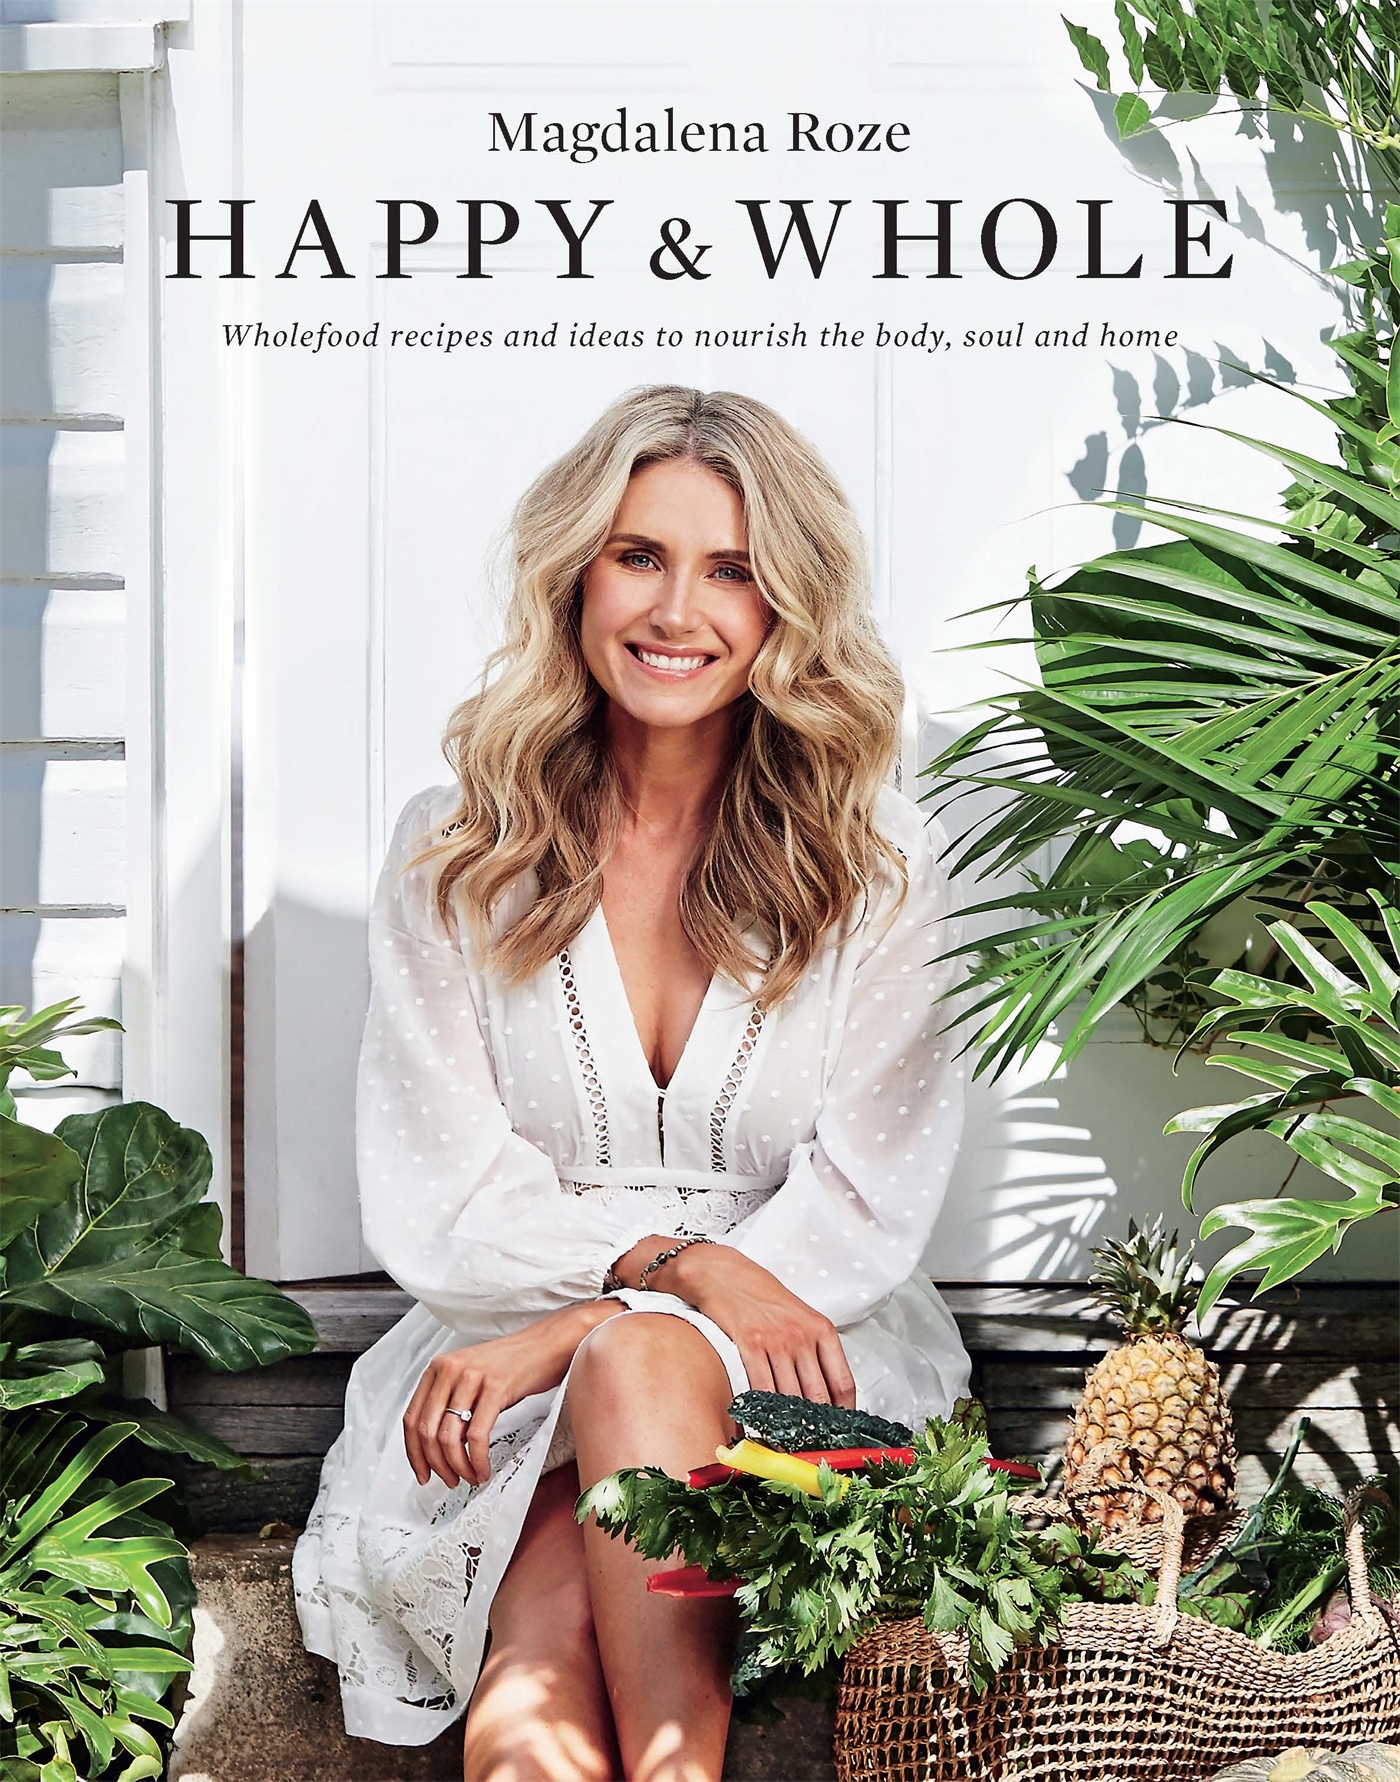 See Need Want Influencers Magdalena Roze Celebrity Cookbook Happy And Whole